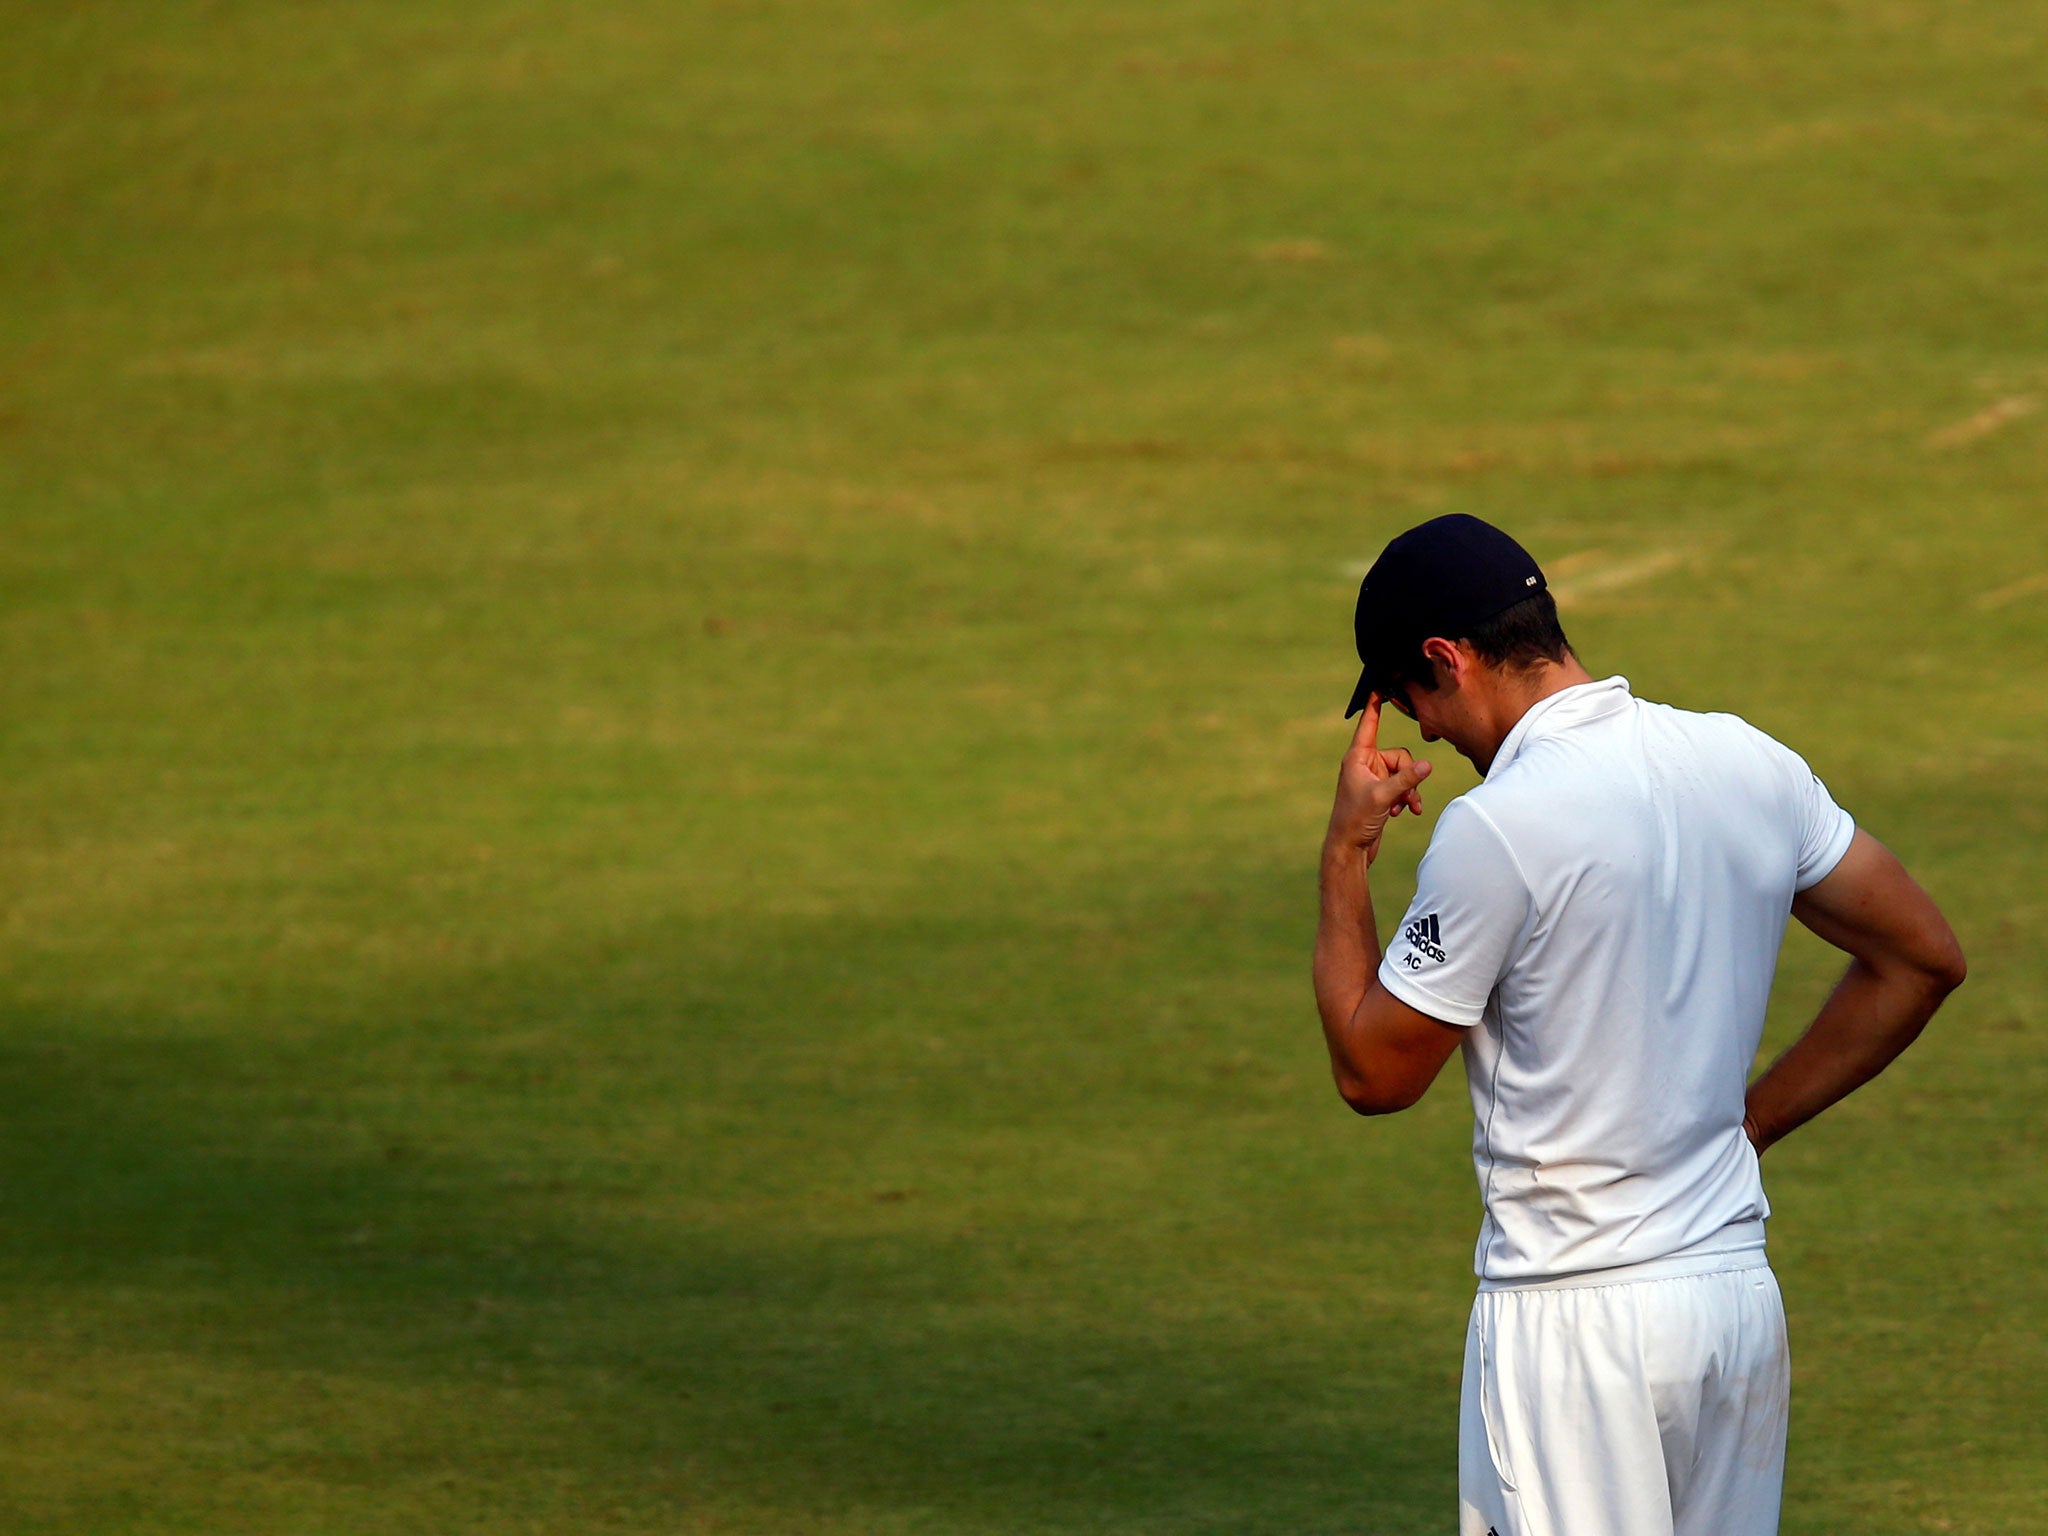 &#13;
Alastair Cook admits his time as England could be over &#13;